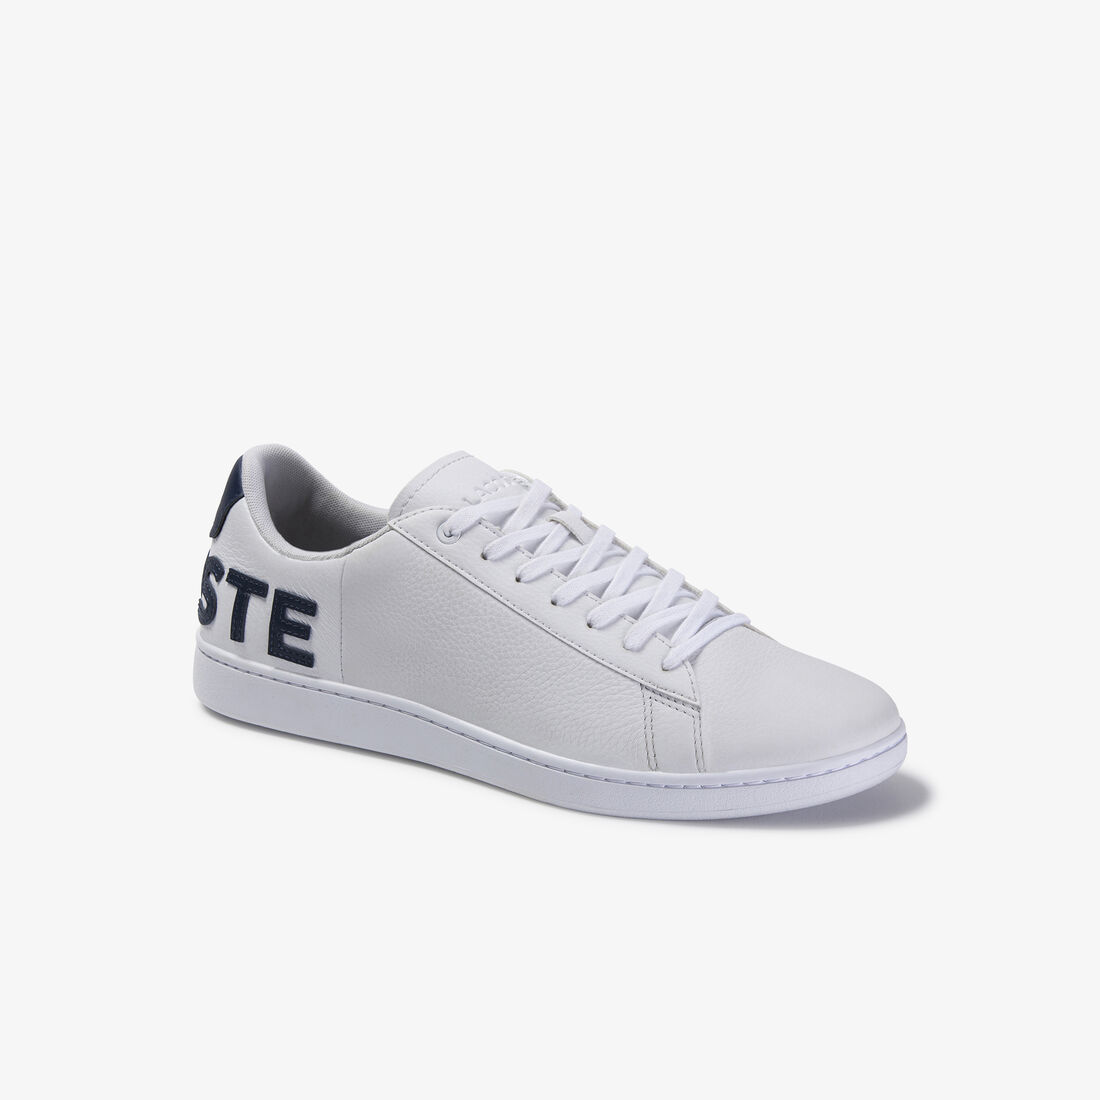 Men's Carnaby Evo Colour-pop Leather Trainers